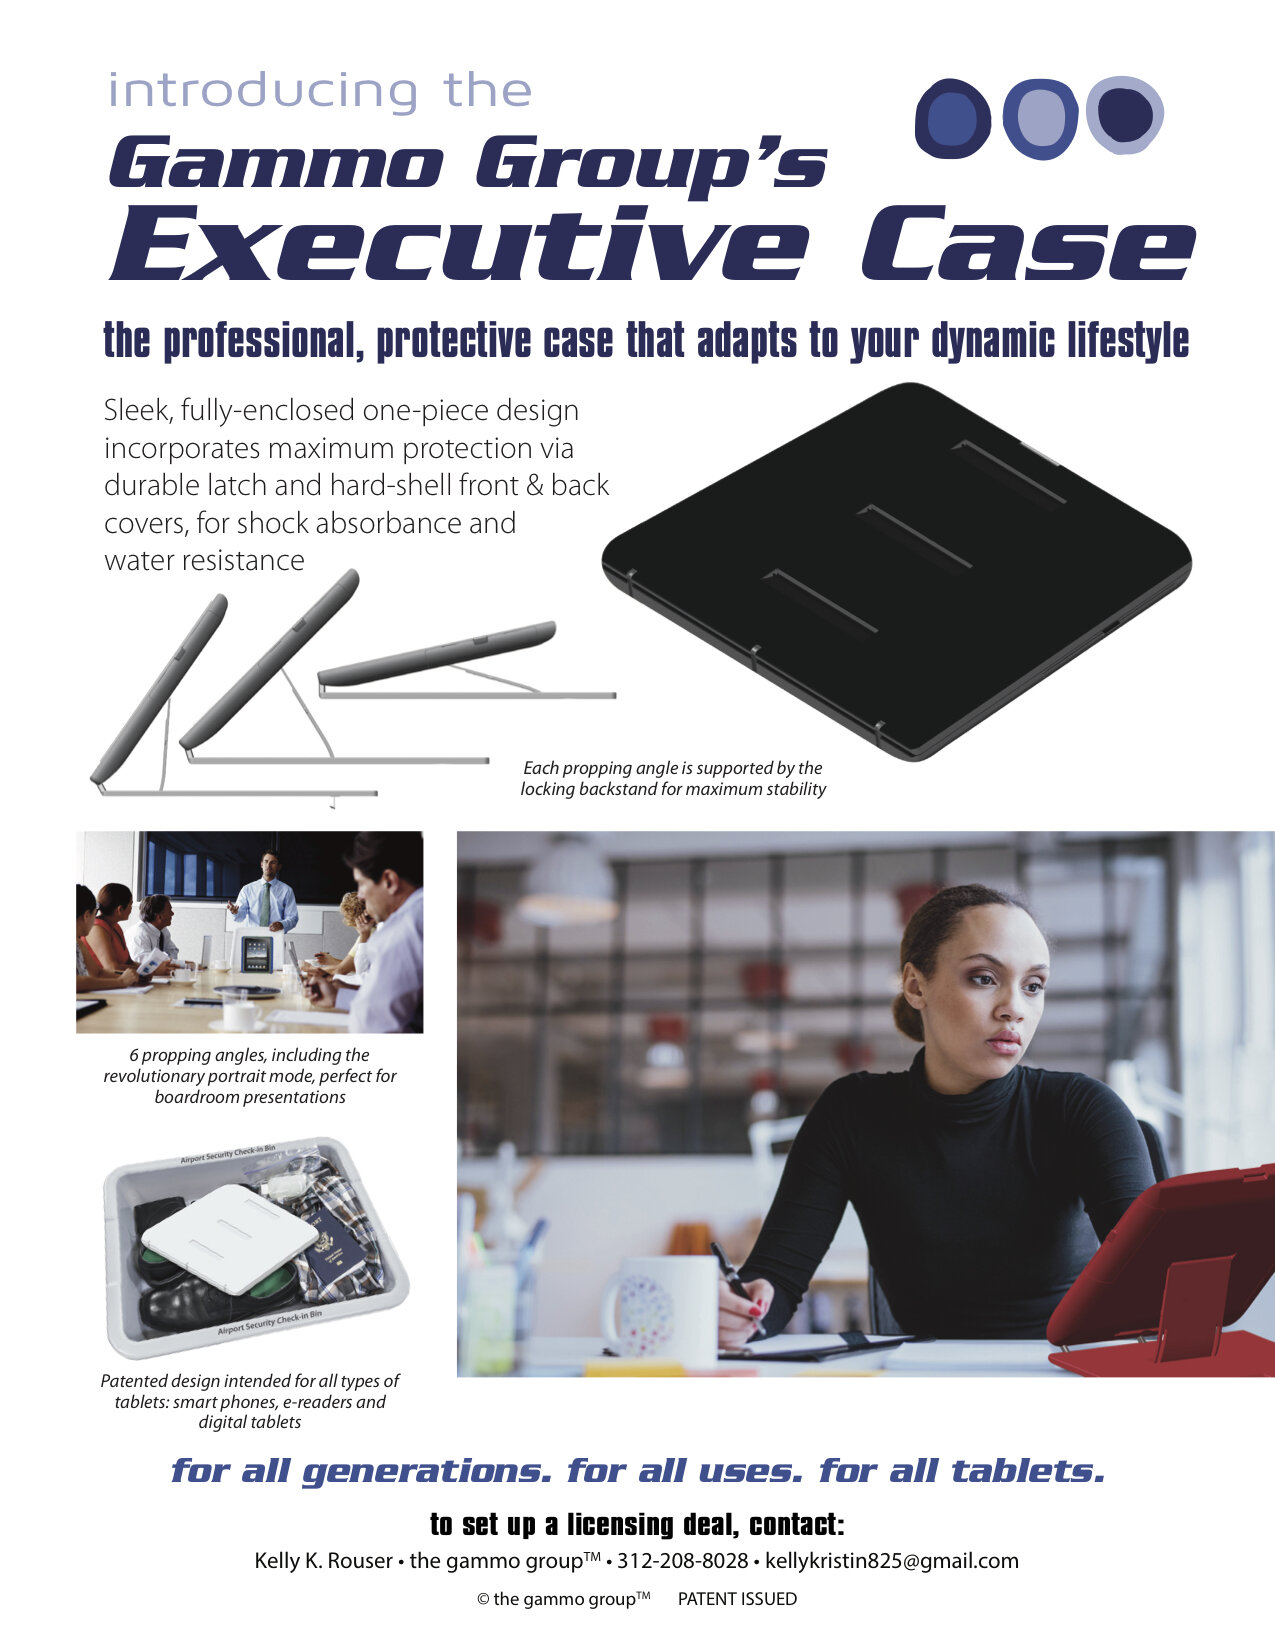 Sell Sheet for The Executive Case